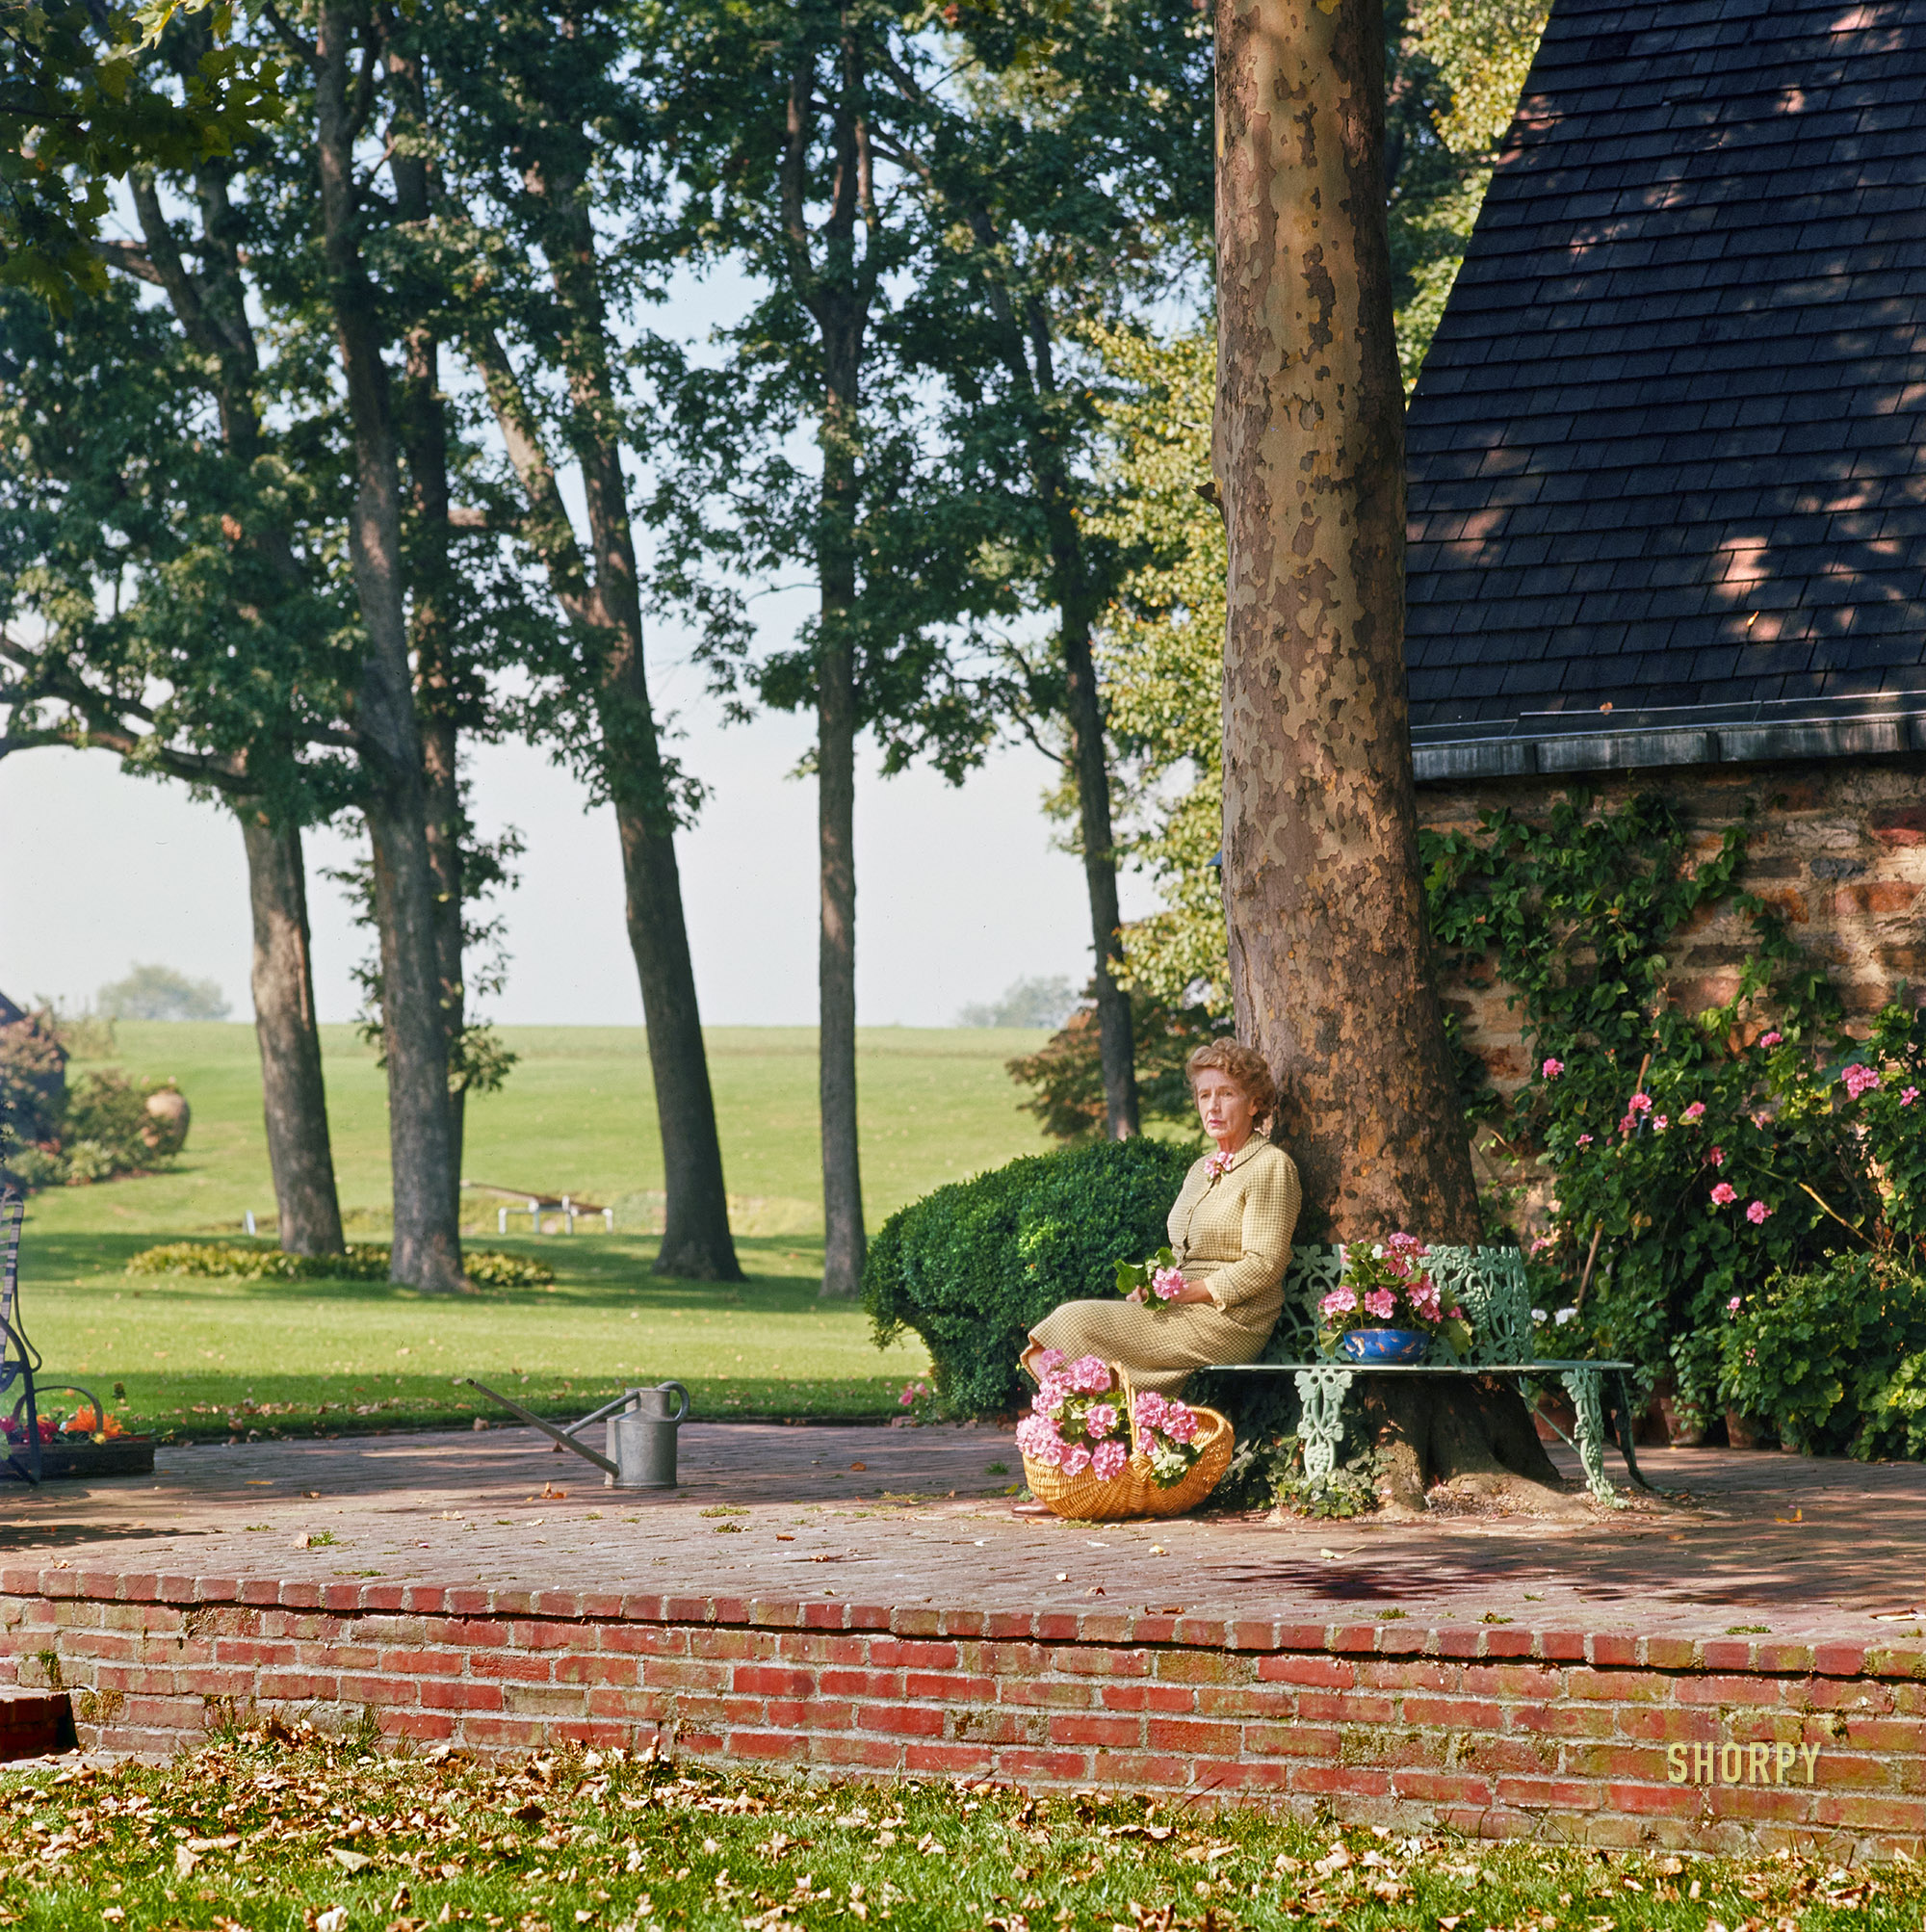 Autumn 1963. "Mrs. Robert McLean." The former Clare Randolph Goode (1894-1983) was married to the longtime president of the Associated Press, who was also chairman of the Philadelphia Bulletin. And whose estate in the Philadelphia suburb of Fort Washington was called Pheasant Run Farm. 120mm color transparency by Toni Frissell. View full size.